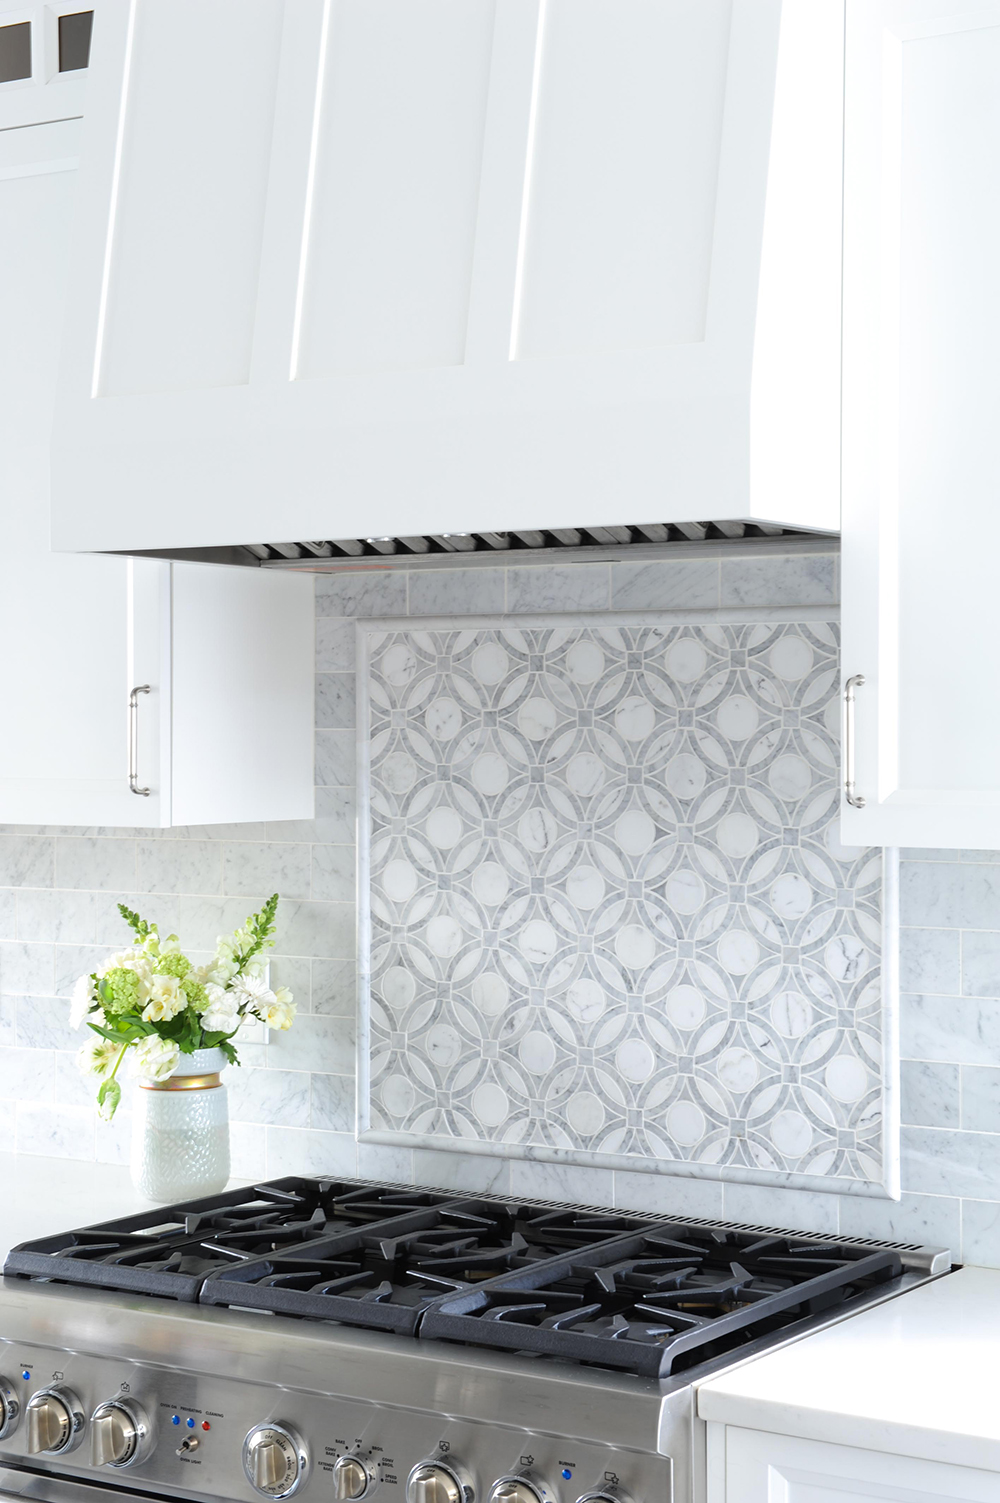 An intricate detail highlights the range in the all-white kitchen.